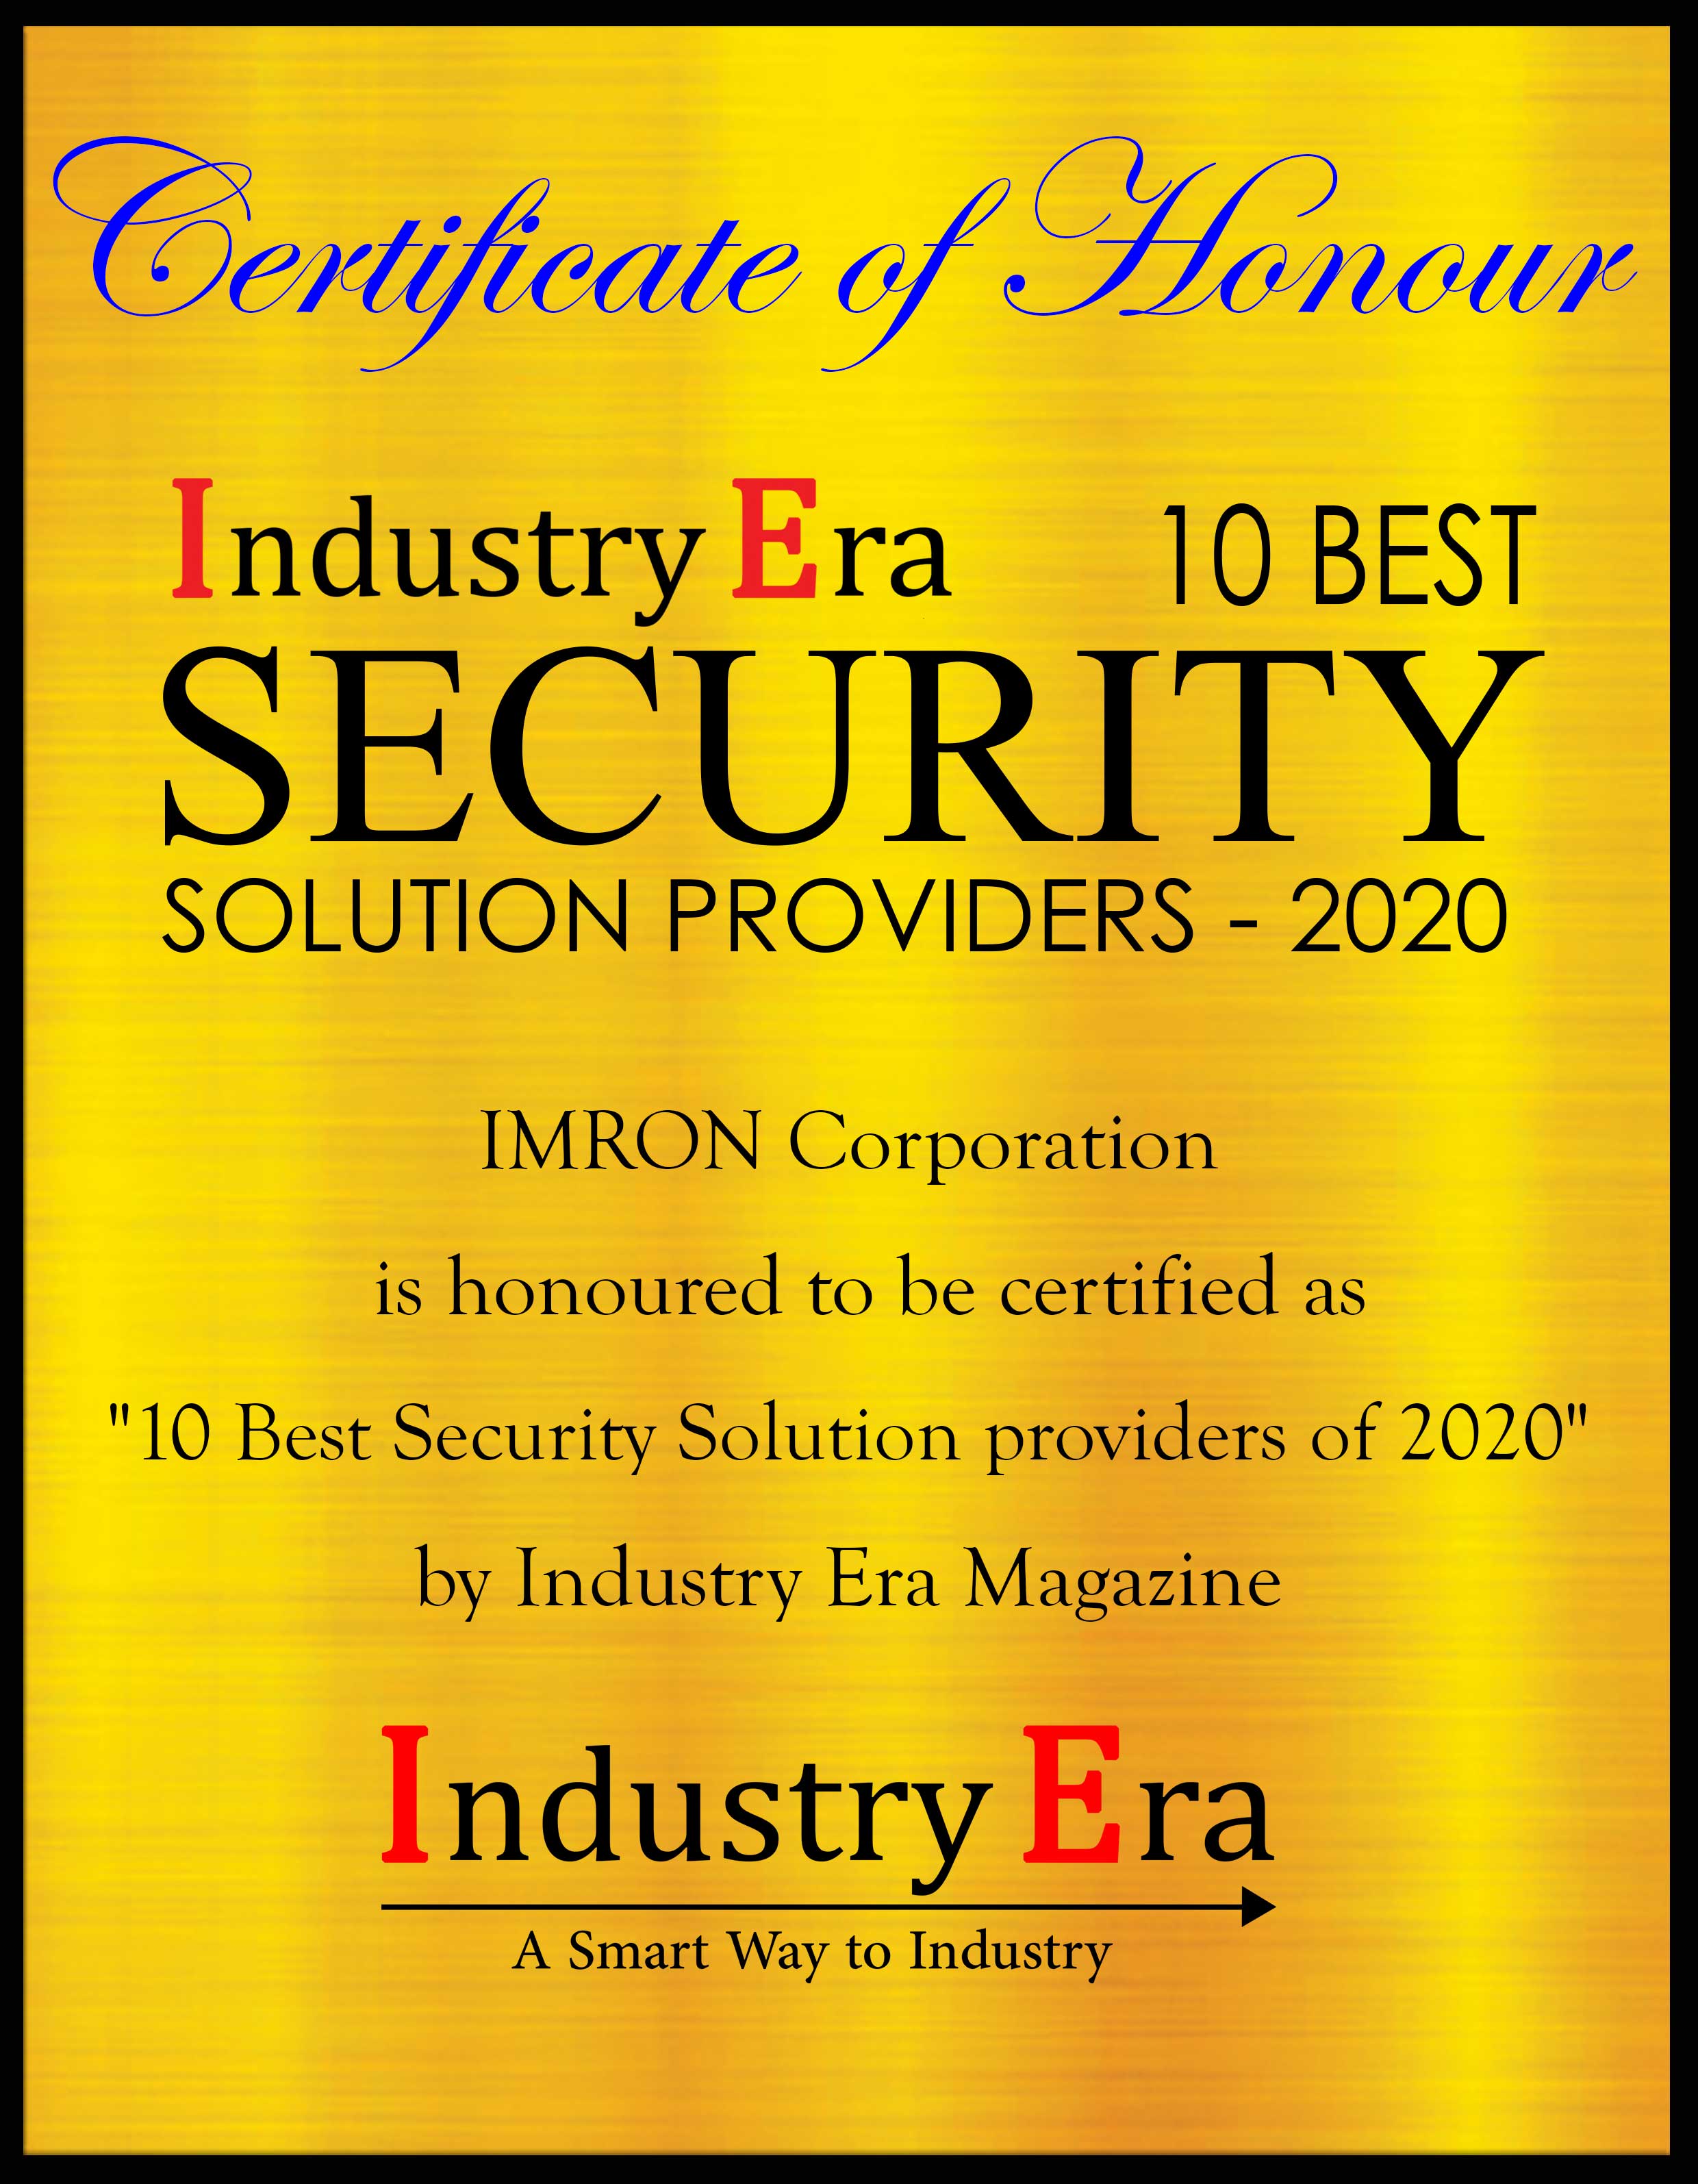 Imron Hussain President IMRON Corporation, 10 Best Security Solution Providers of 2020